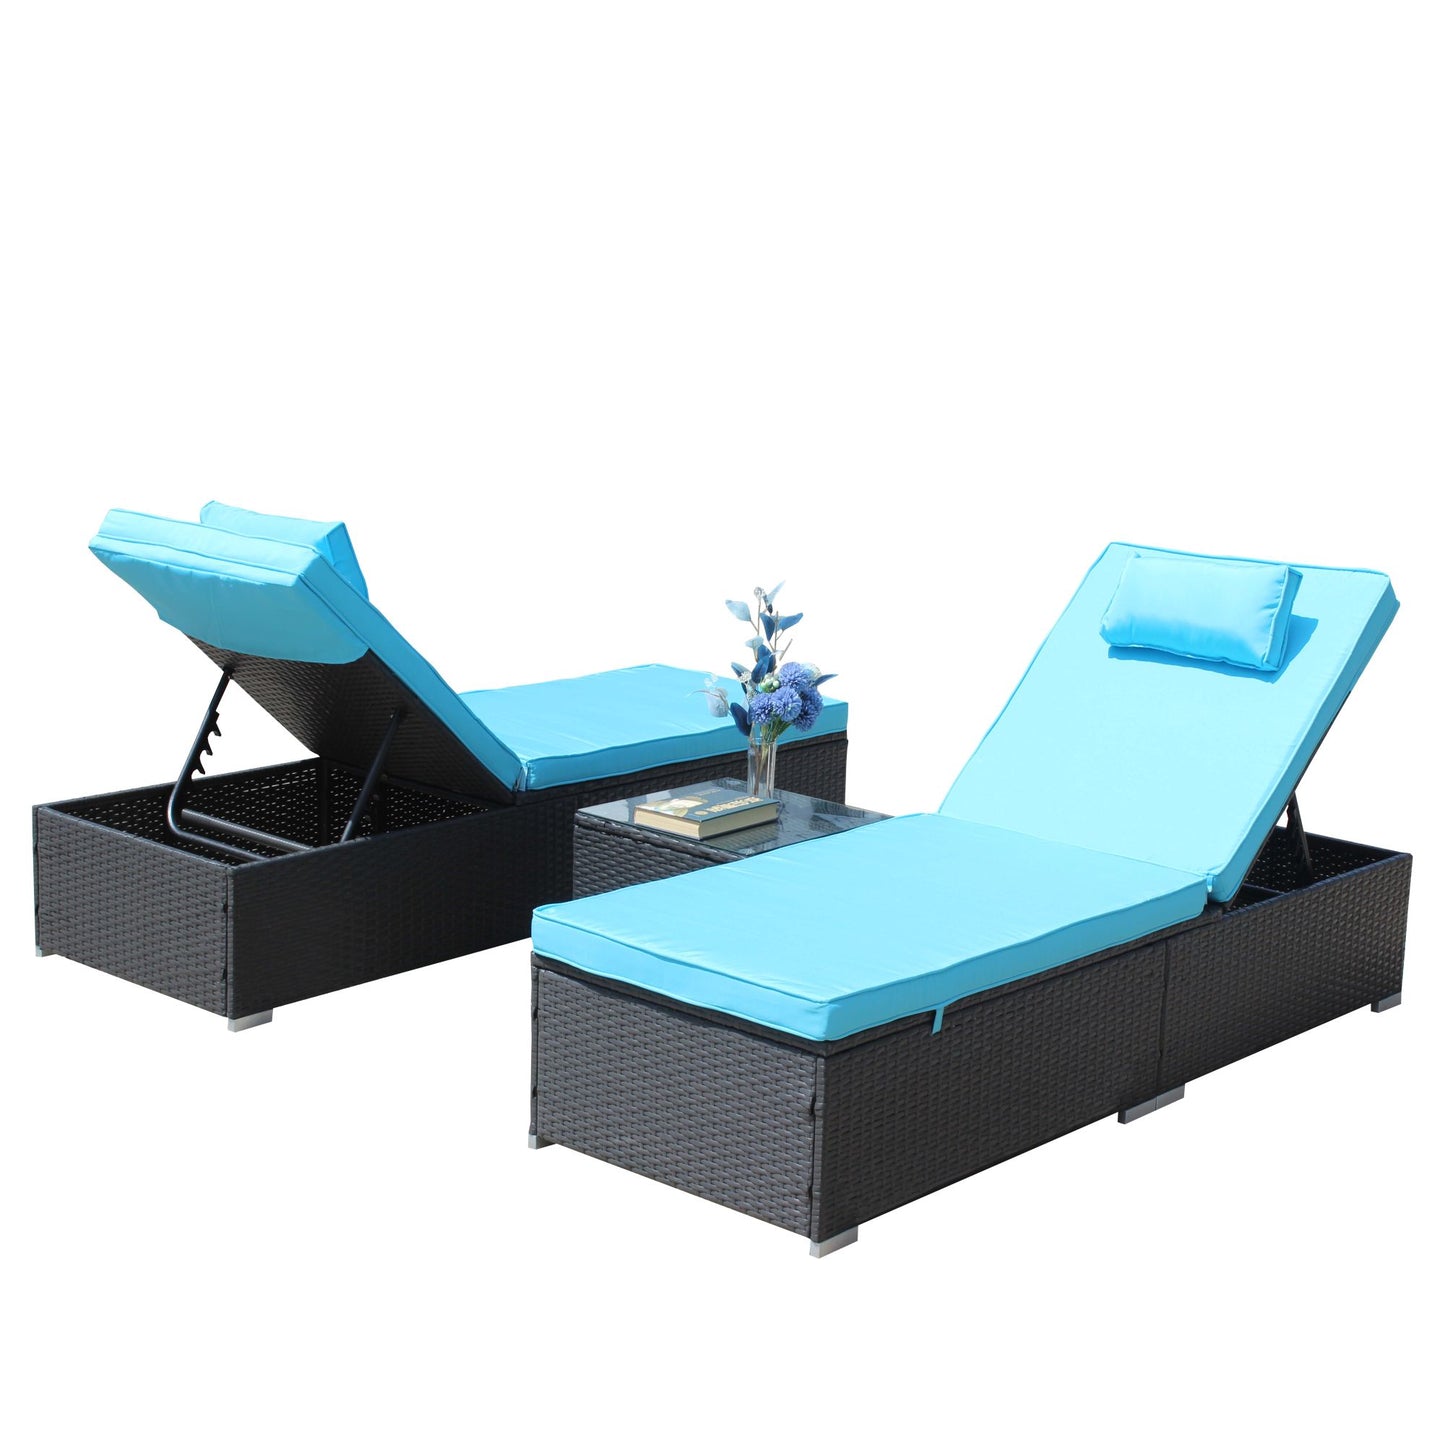 3-Piece Outdoor Patio Furniture Set Chaise Lounge